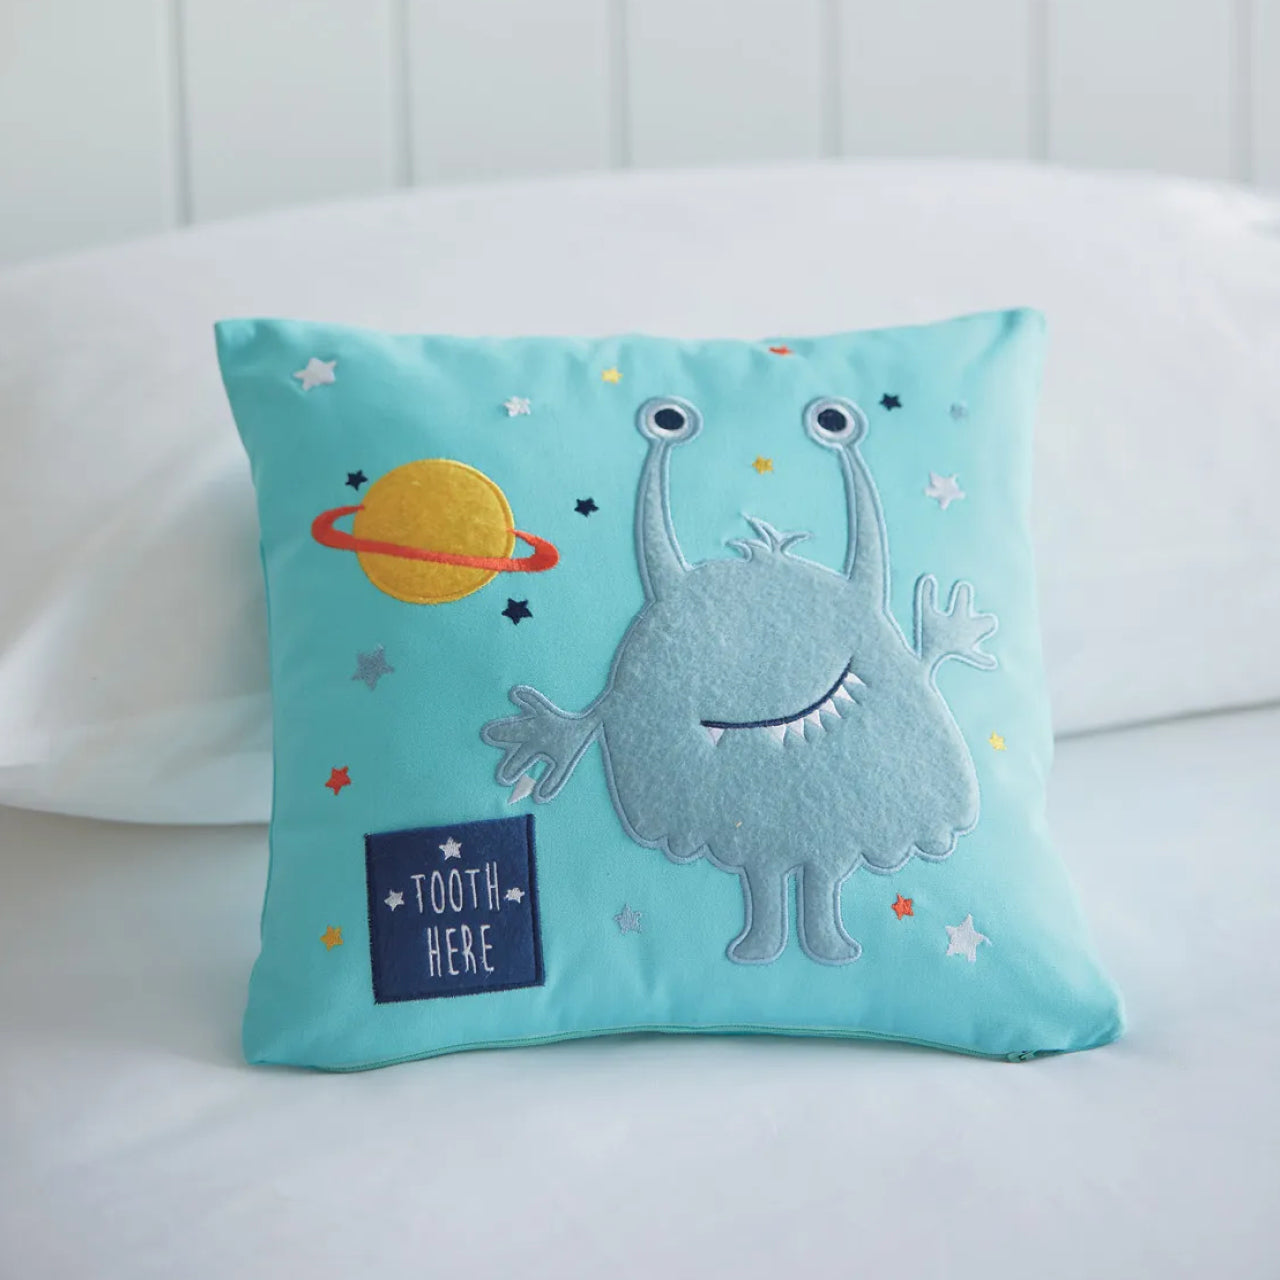 Monster Novelty Cushion sitting up on bed